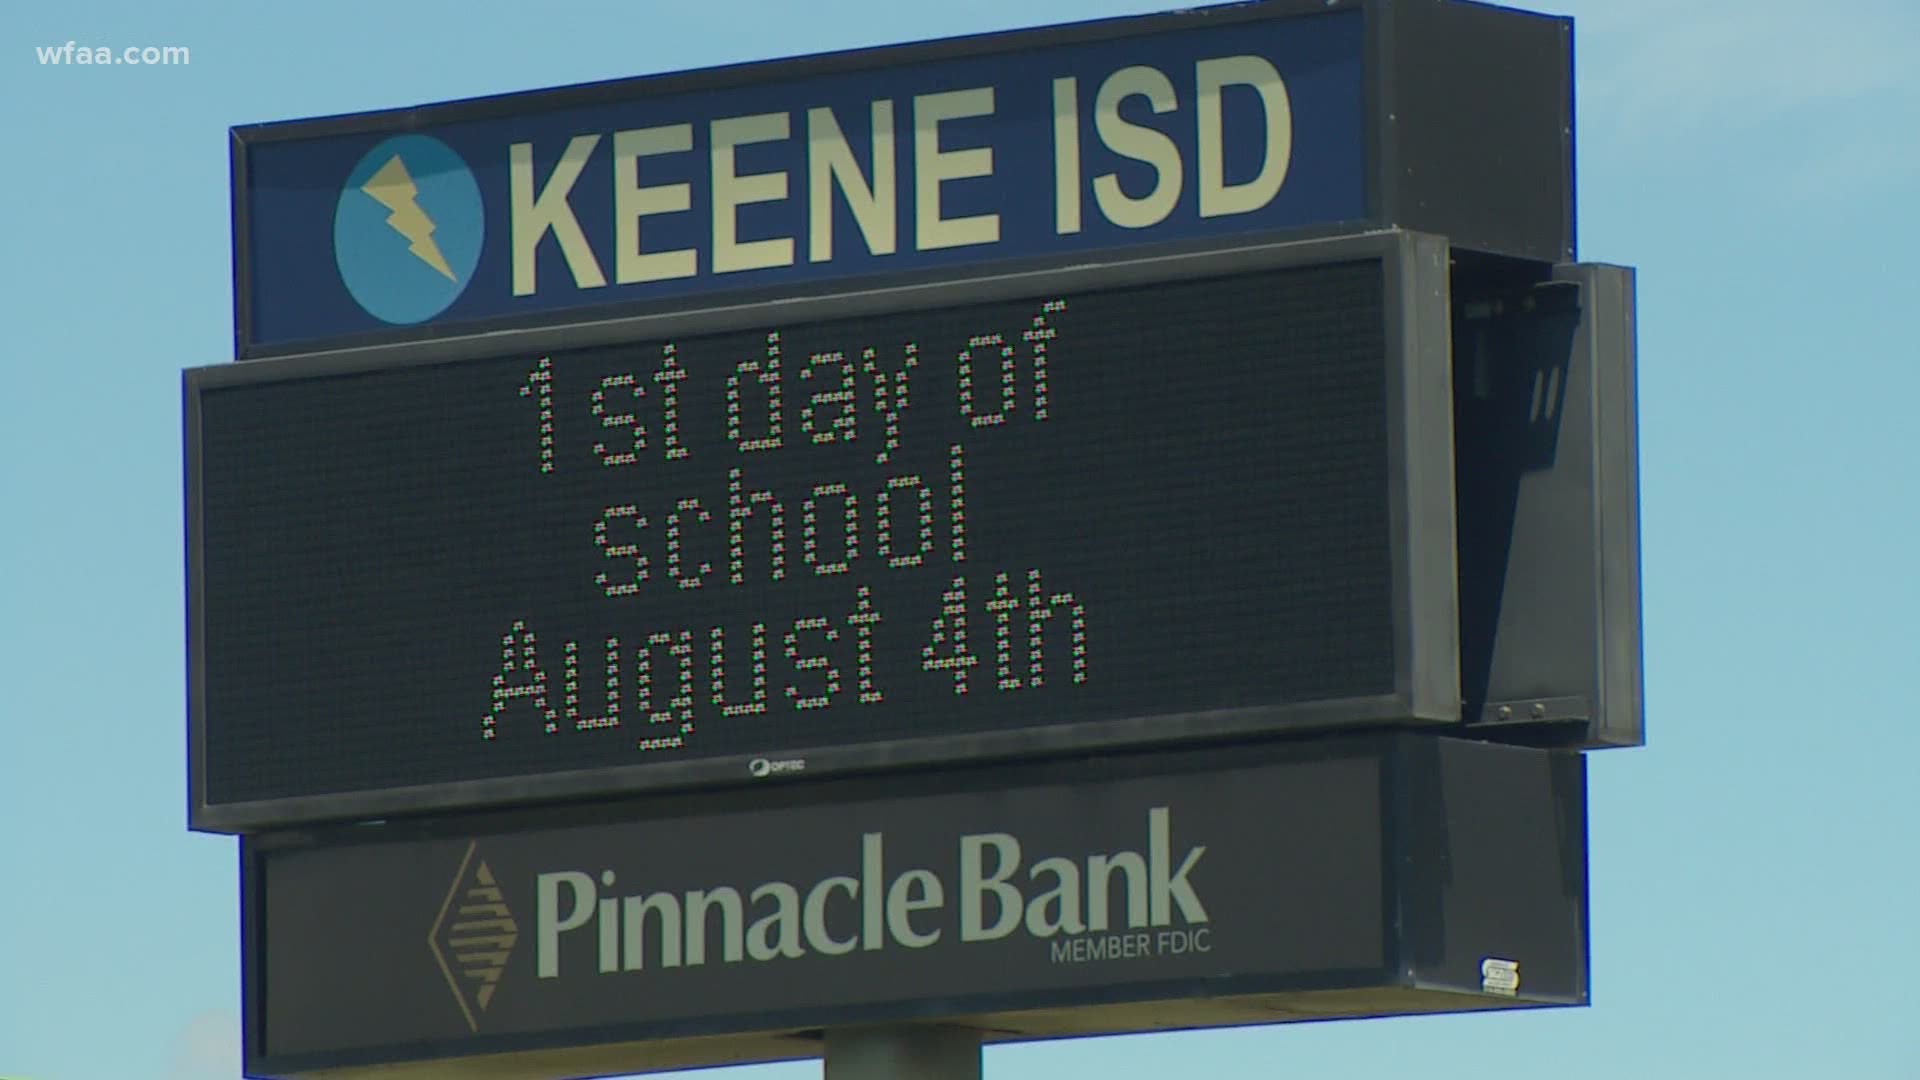 Keene ISD in Johnson County will be one of the first to open since shutting down due to the coronavirus pandemic.